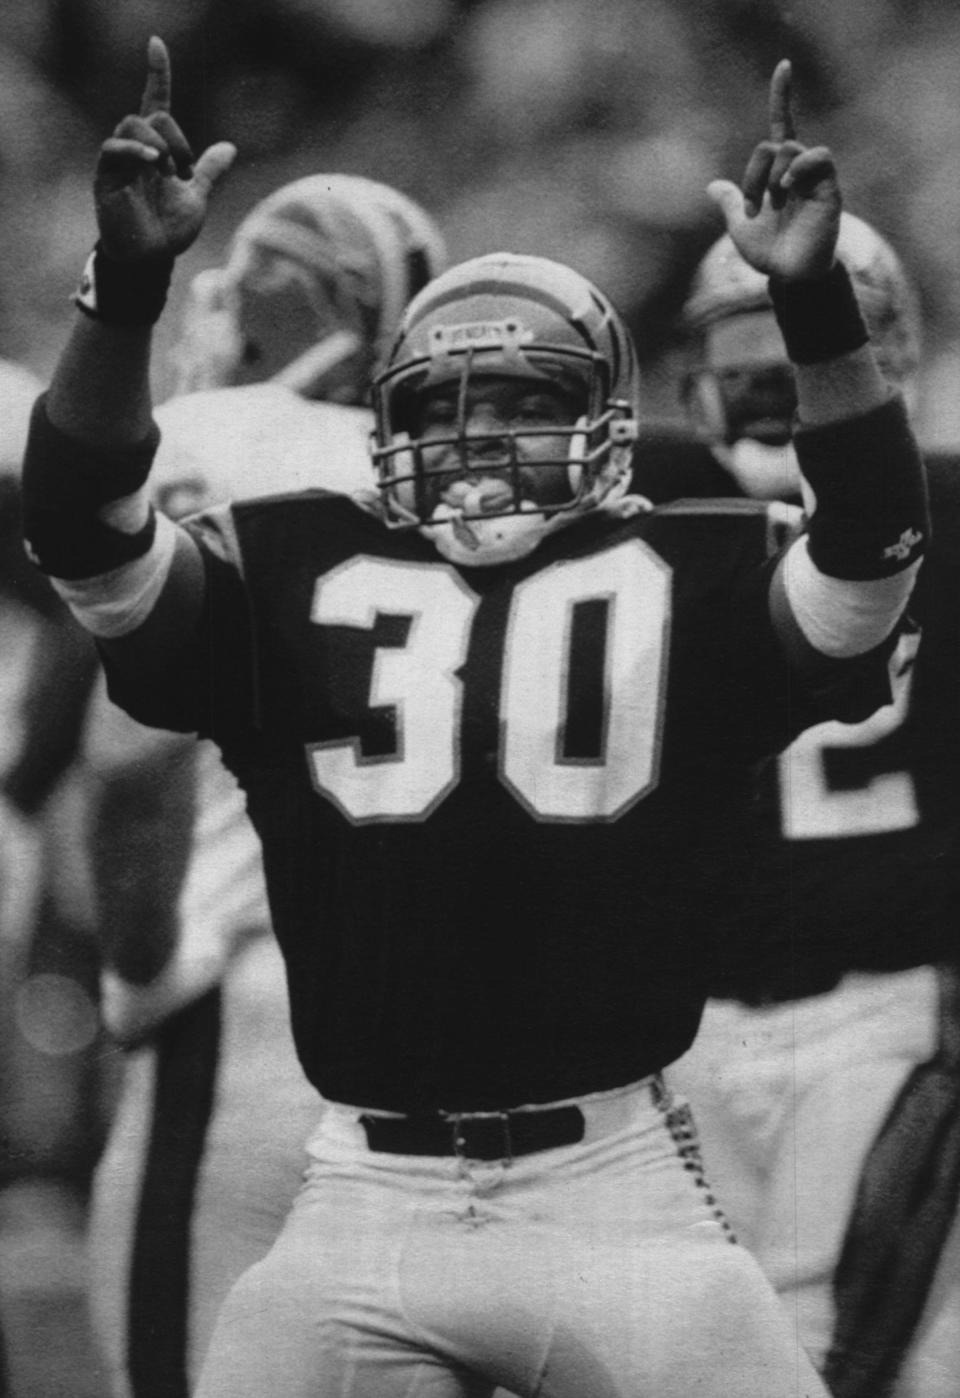 Cincinnati Bengals rookie fullback Ickey Woods does a dance he calls the "Ickey Shuffle" after scoring a touchdown in this Nov. 27, 1988, file photo. Woods scored three touchdowns in the Bengals 35-21 win over the Buffalo Bills.